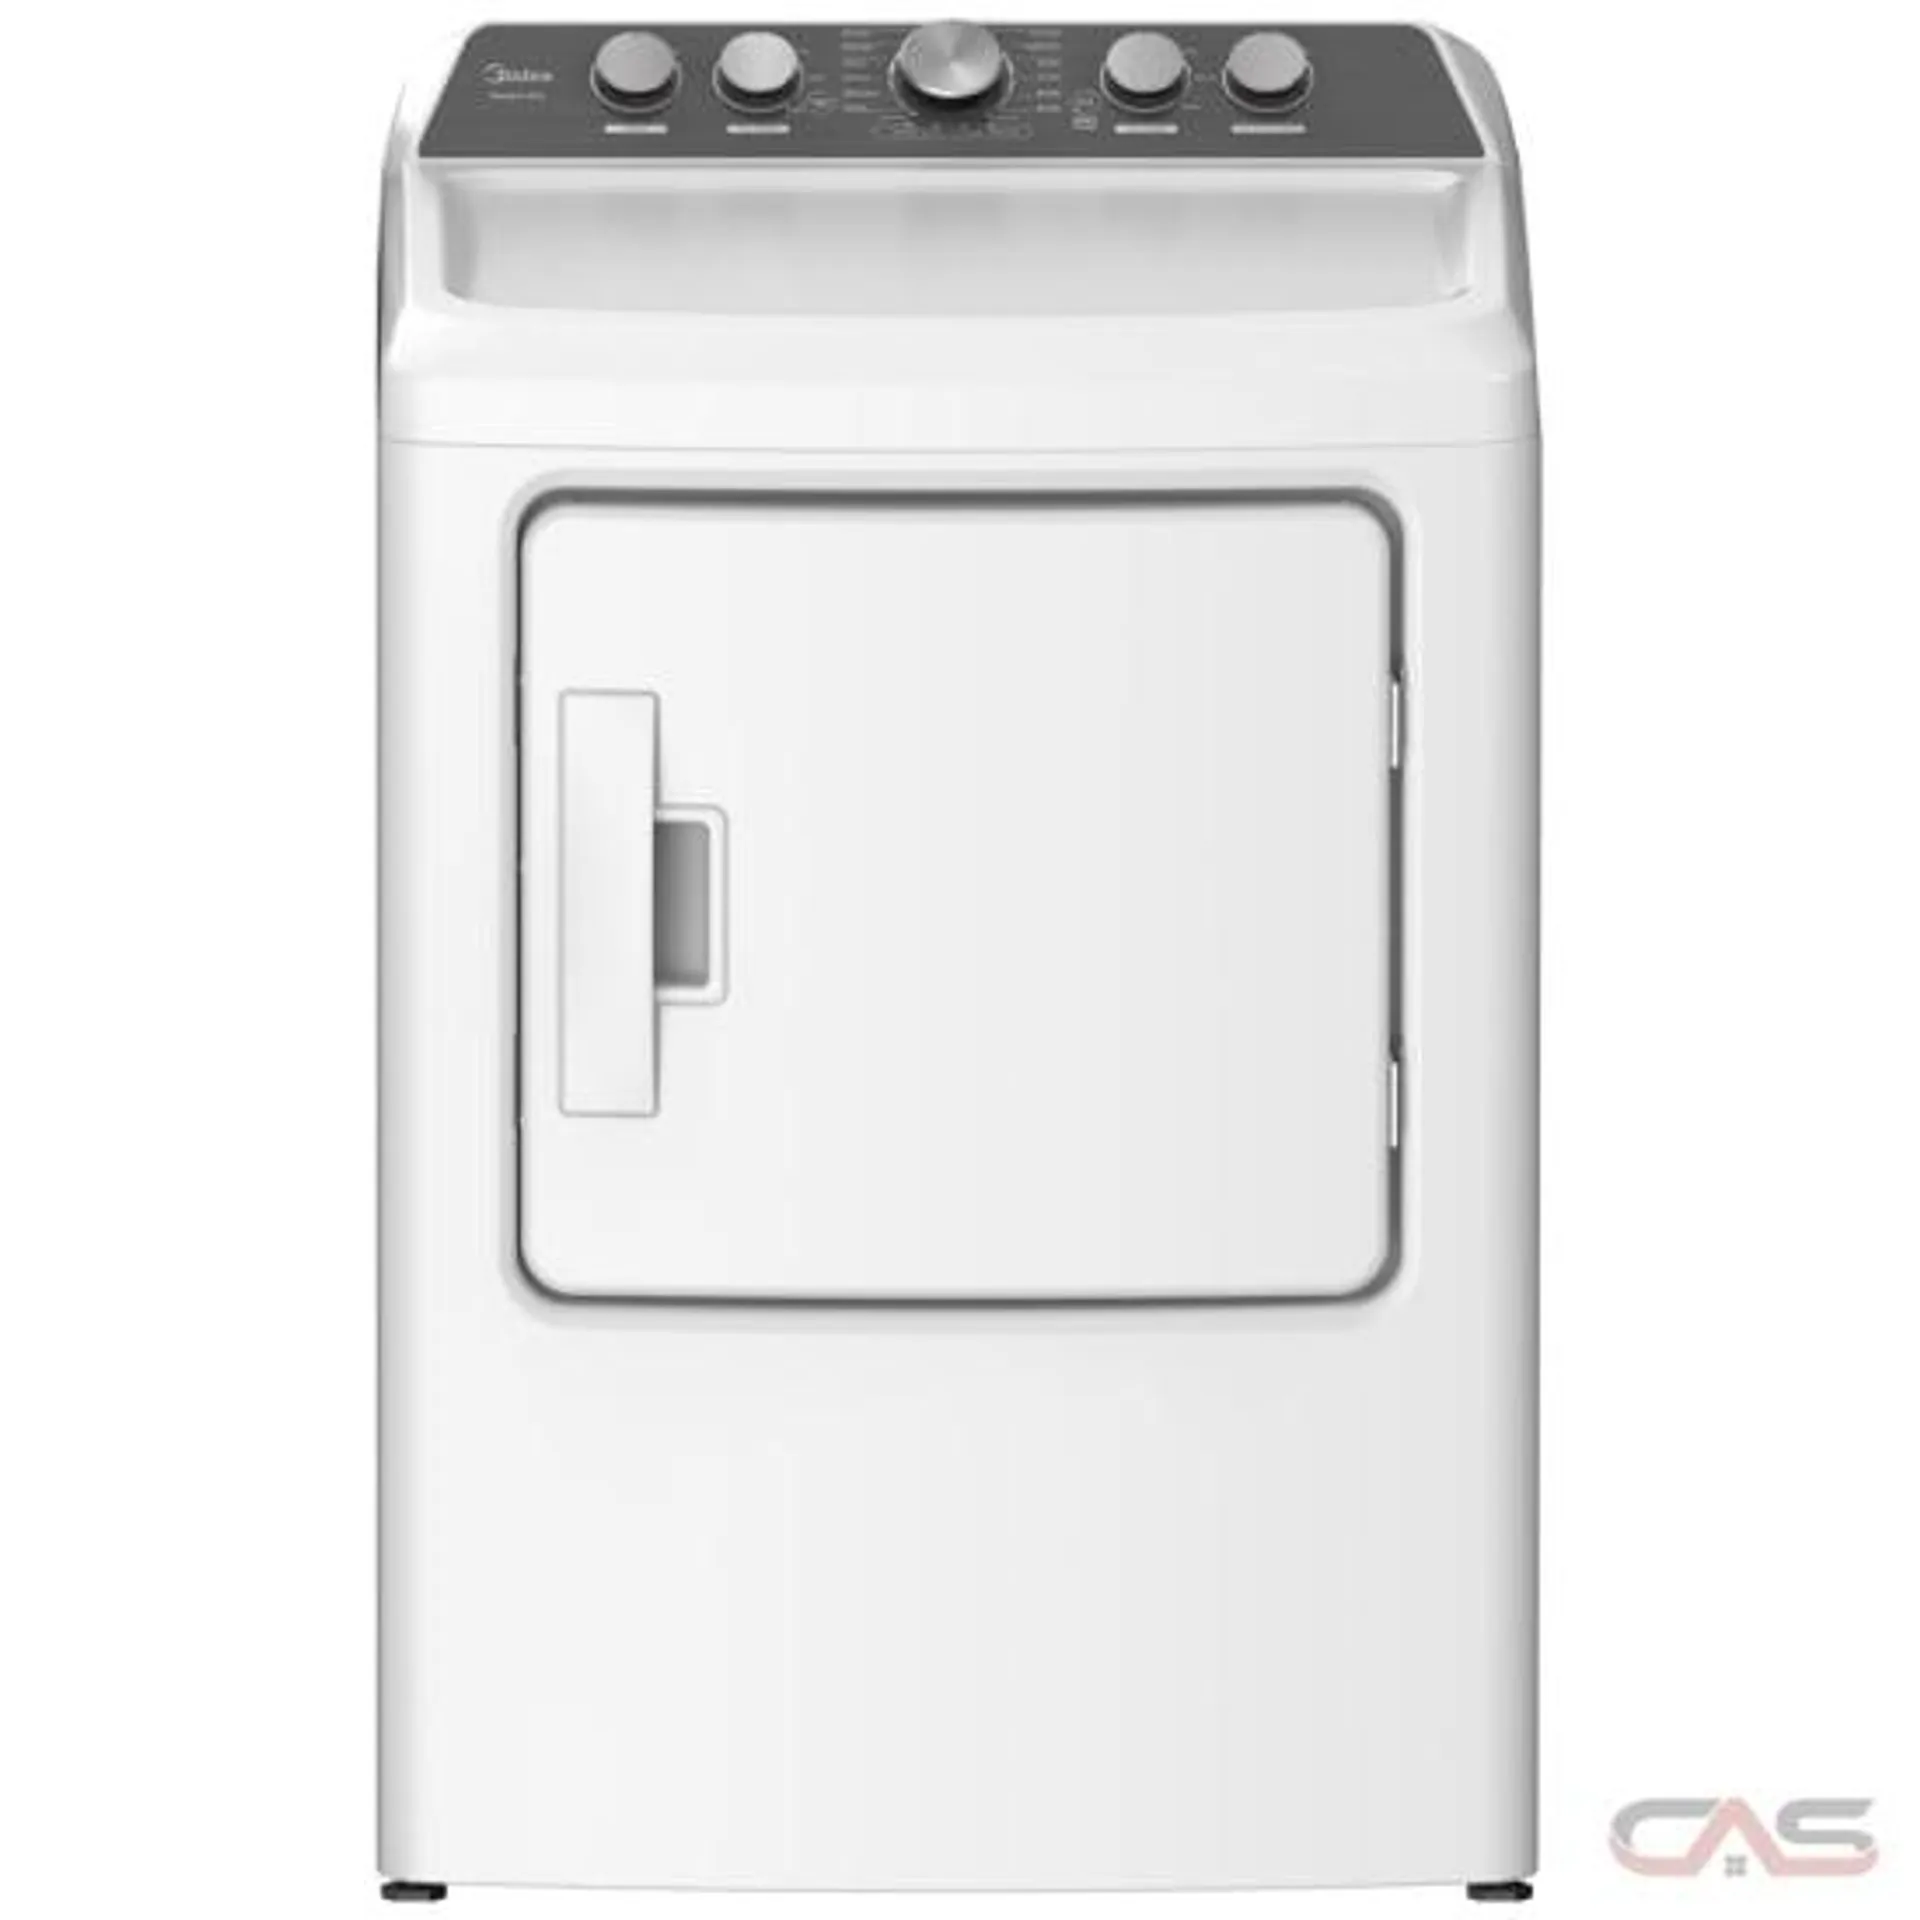 Midea MLE47C4AWW Dryer, 27 inch Width, Electric, 6.7 cu. ft. Capacity, 4 Temperature Settings, Steel Drum, White colour